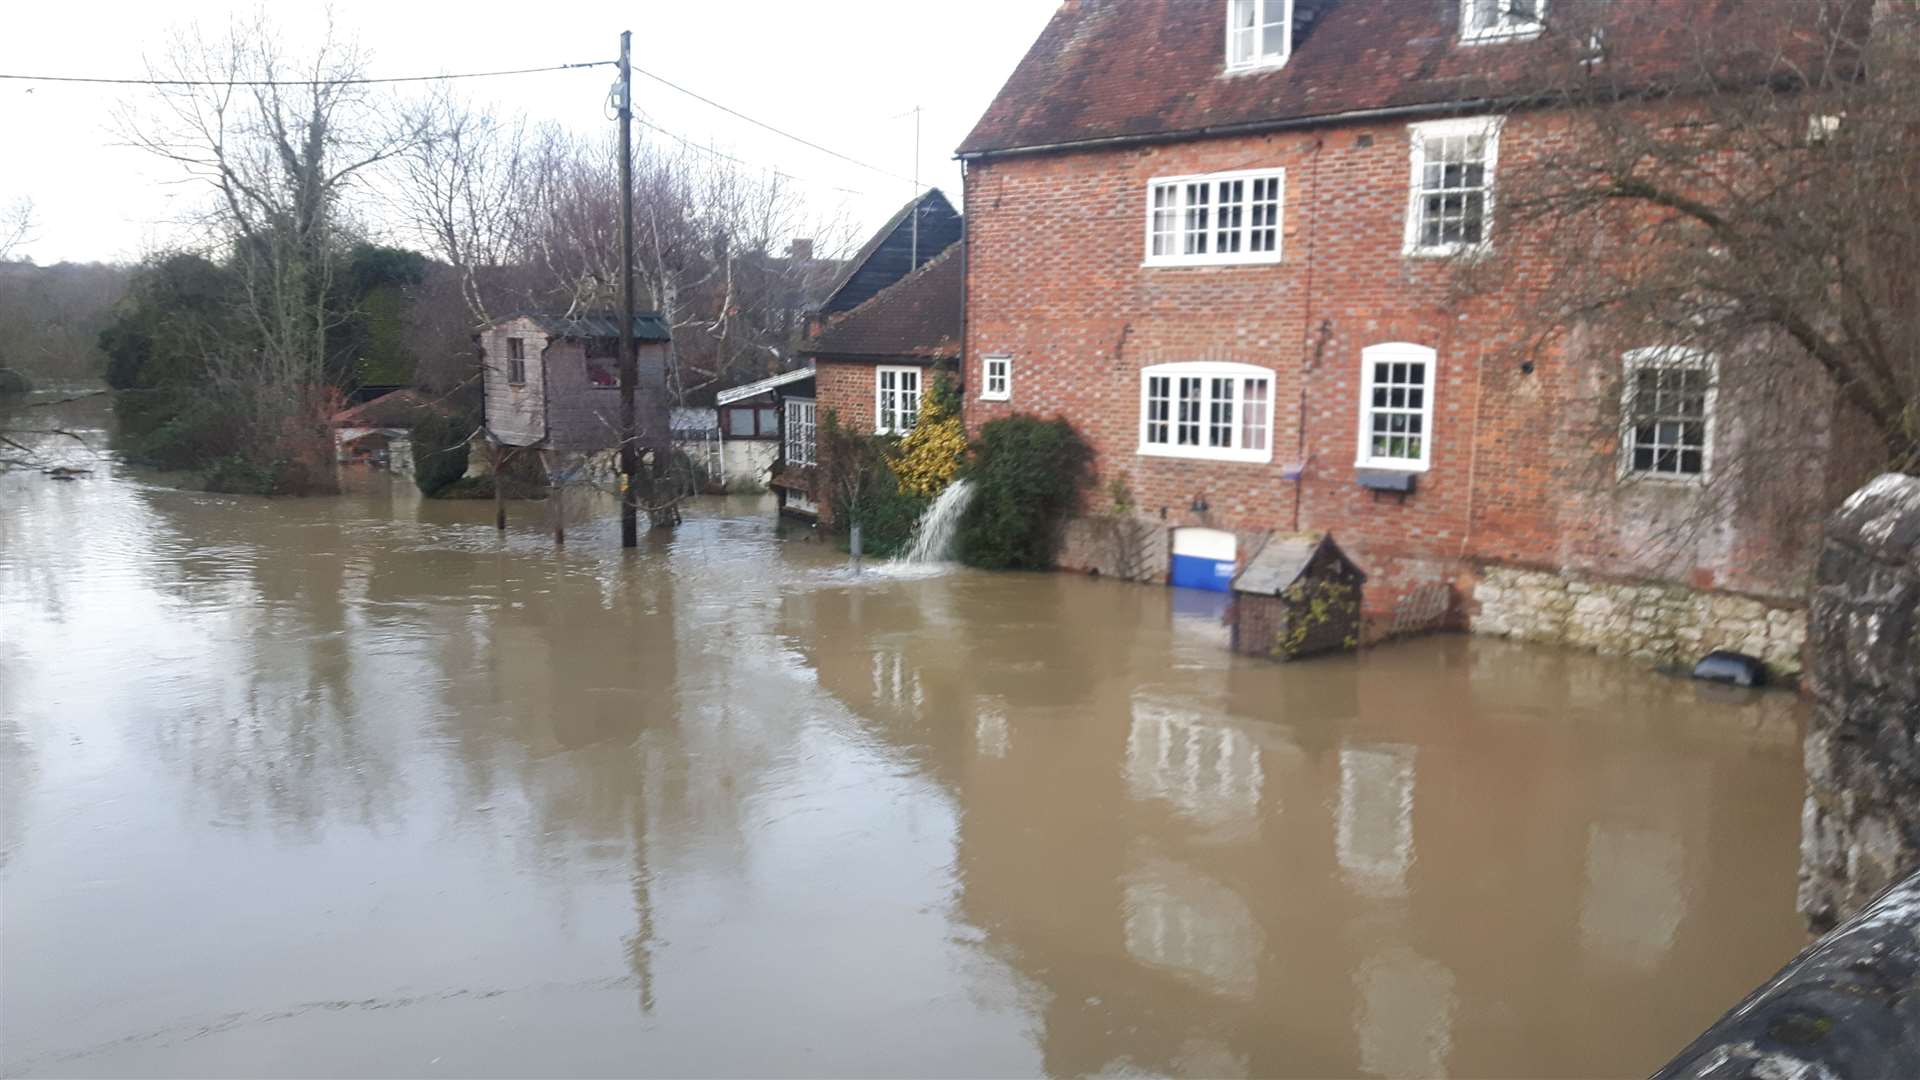 Due to its riverside location Yalding is frequently at risk of flooding.